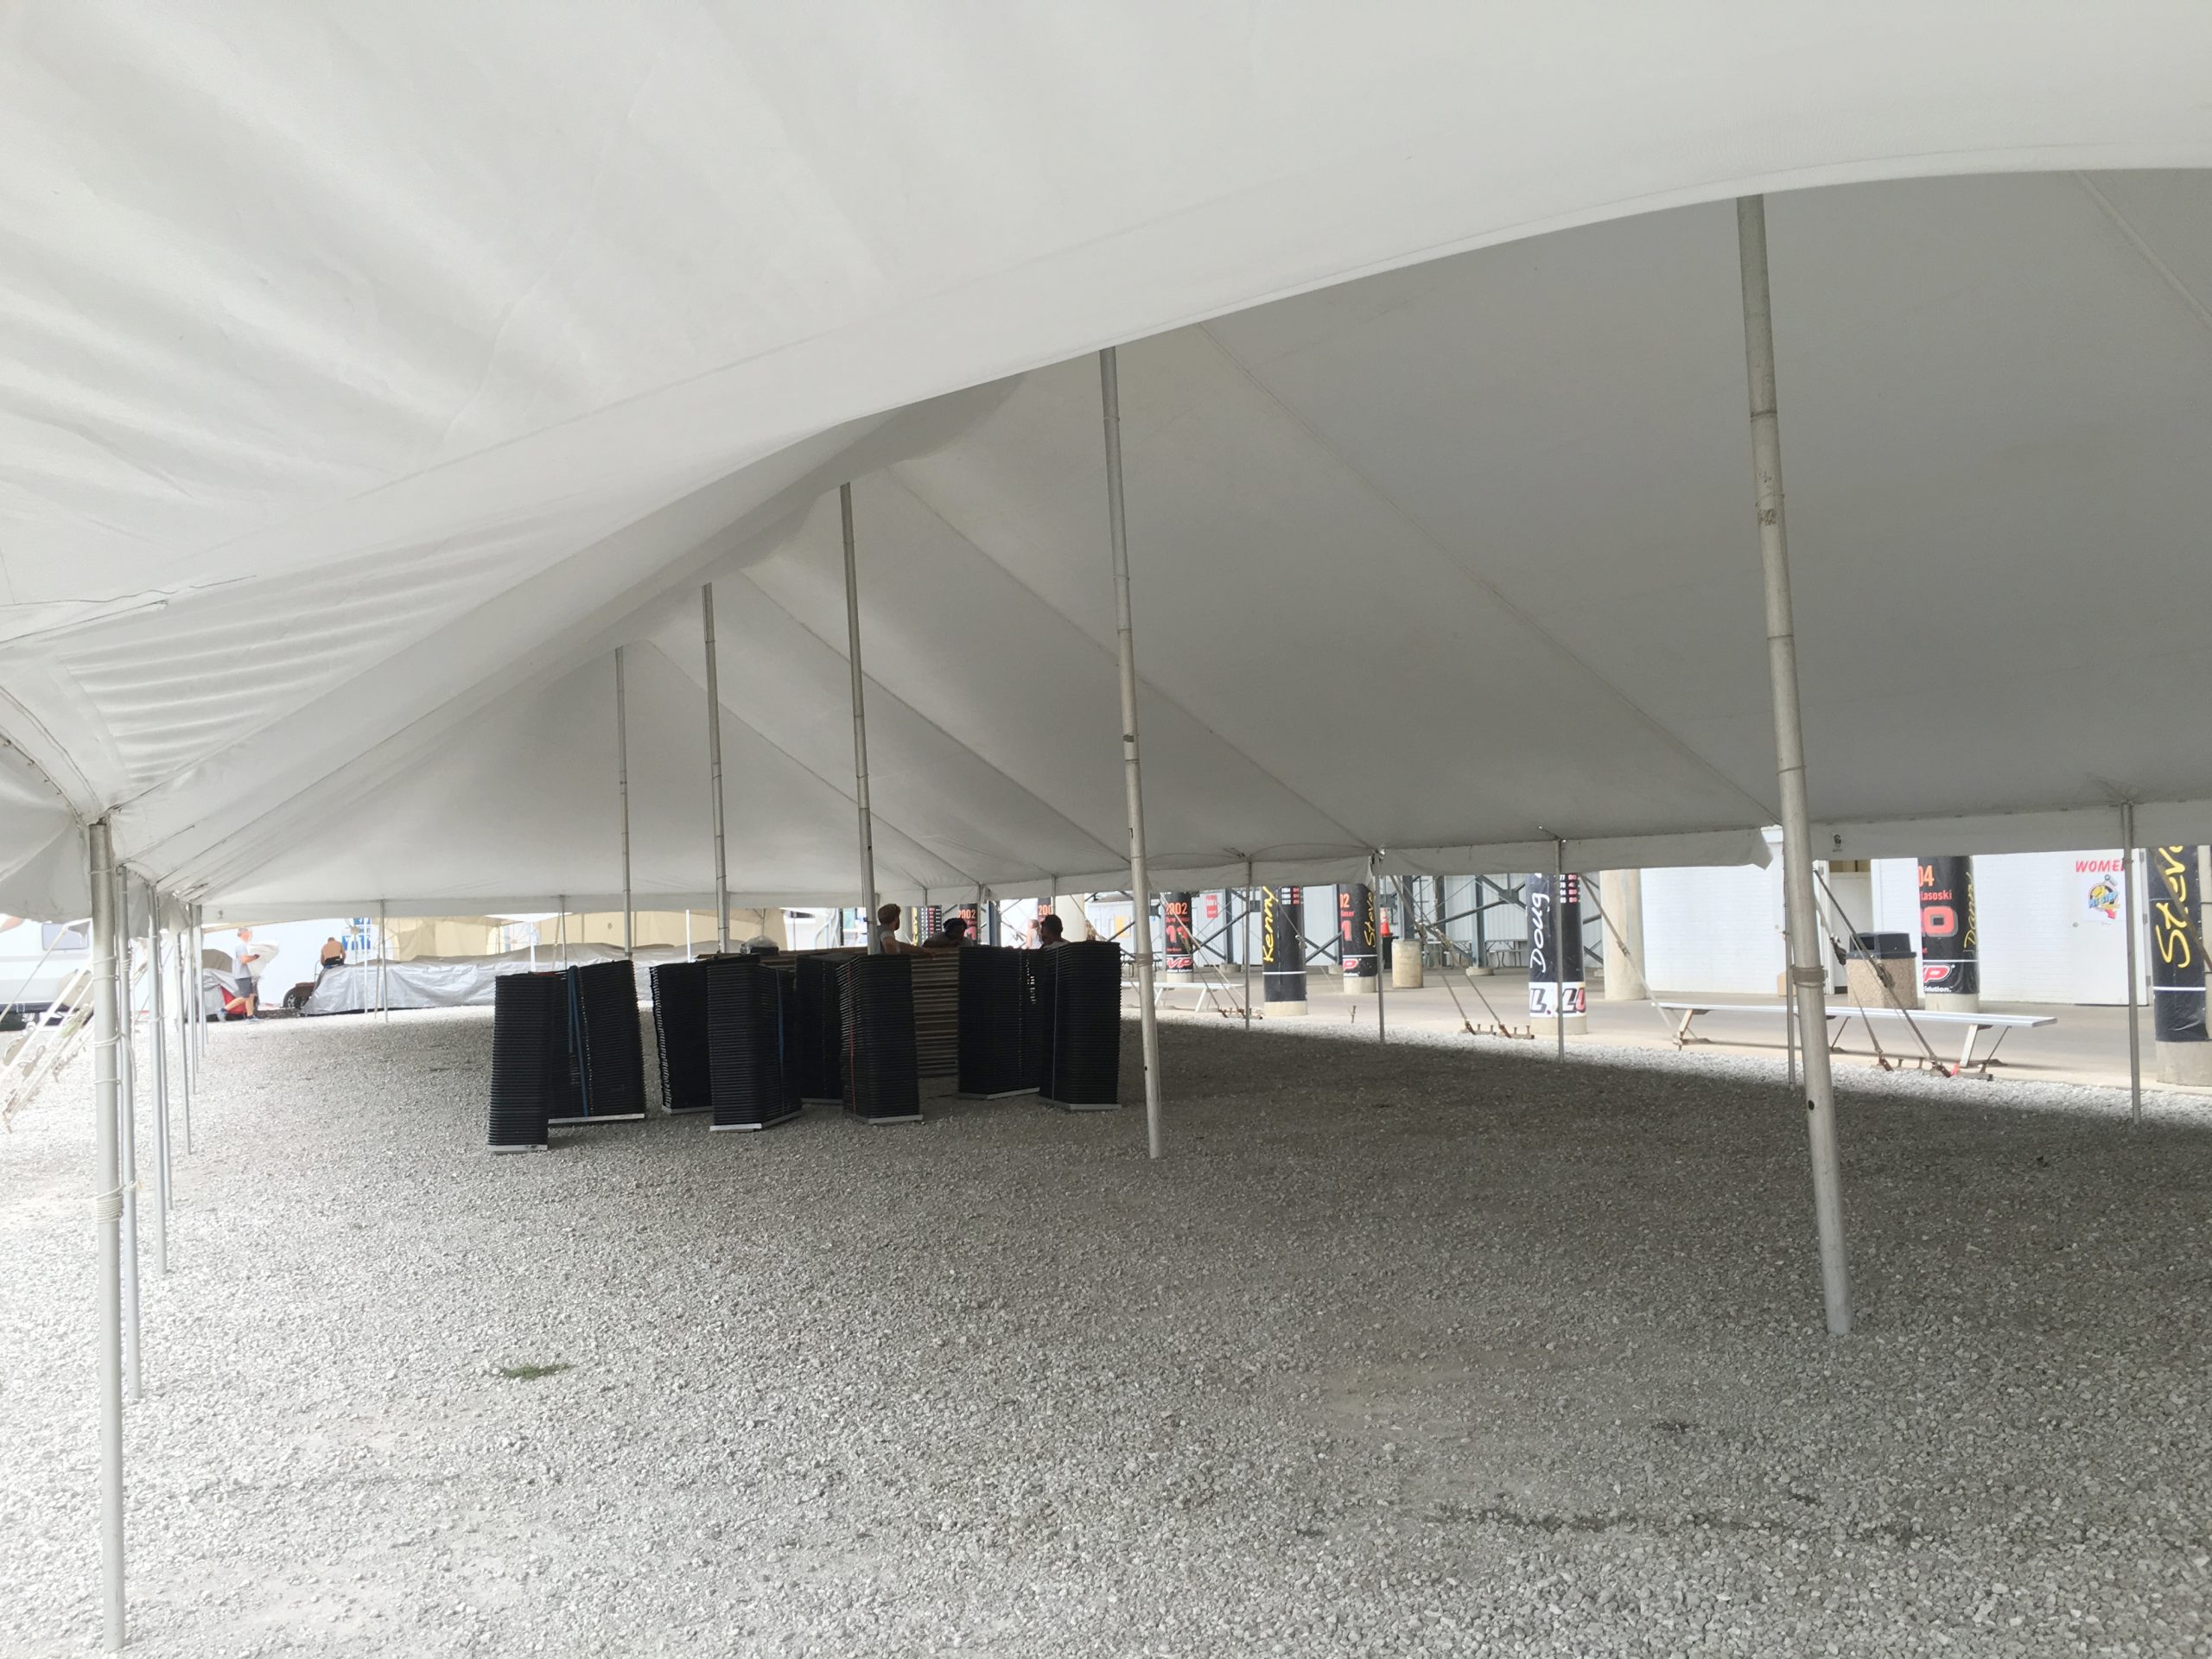 Under a 40' x 120' rope and pole tent at Knoxville Raceway (Marion County Fairgrounds) in Iowa with black chairs